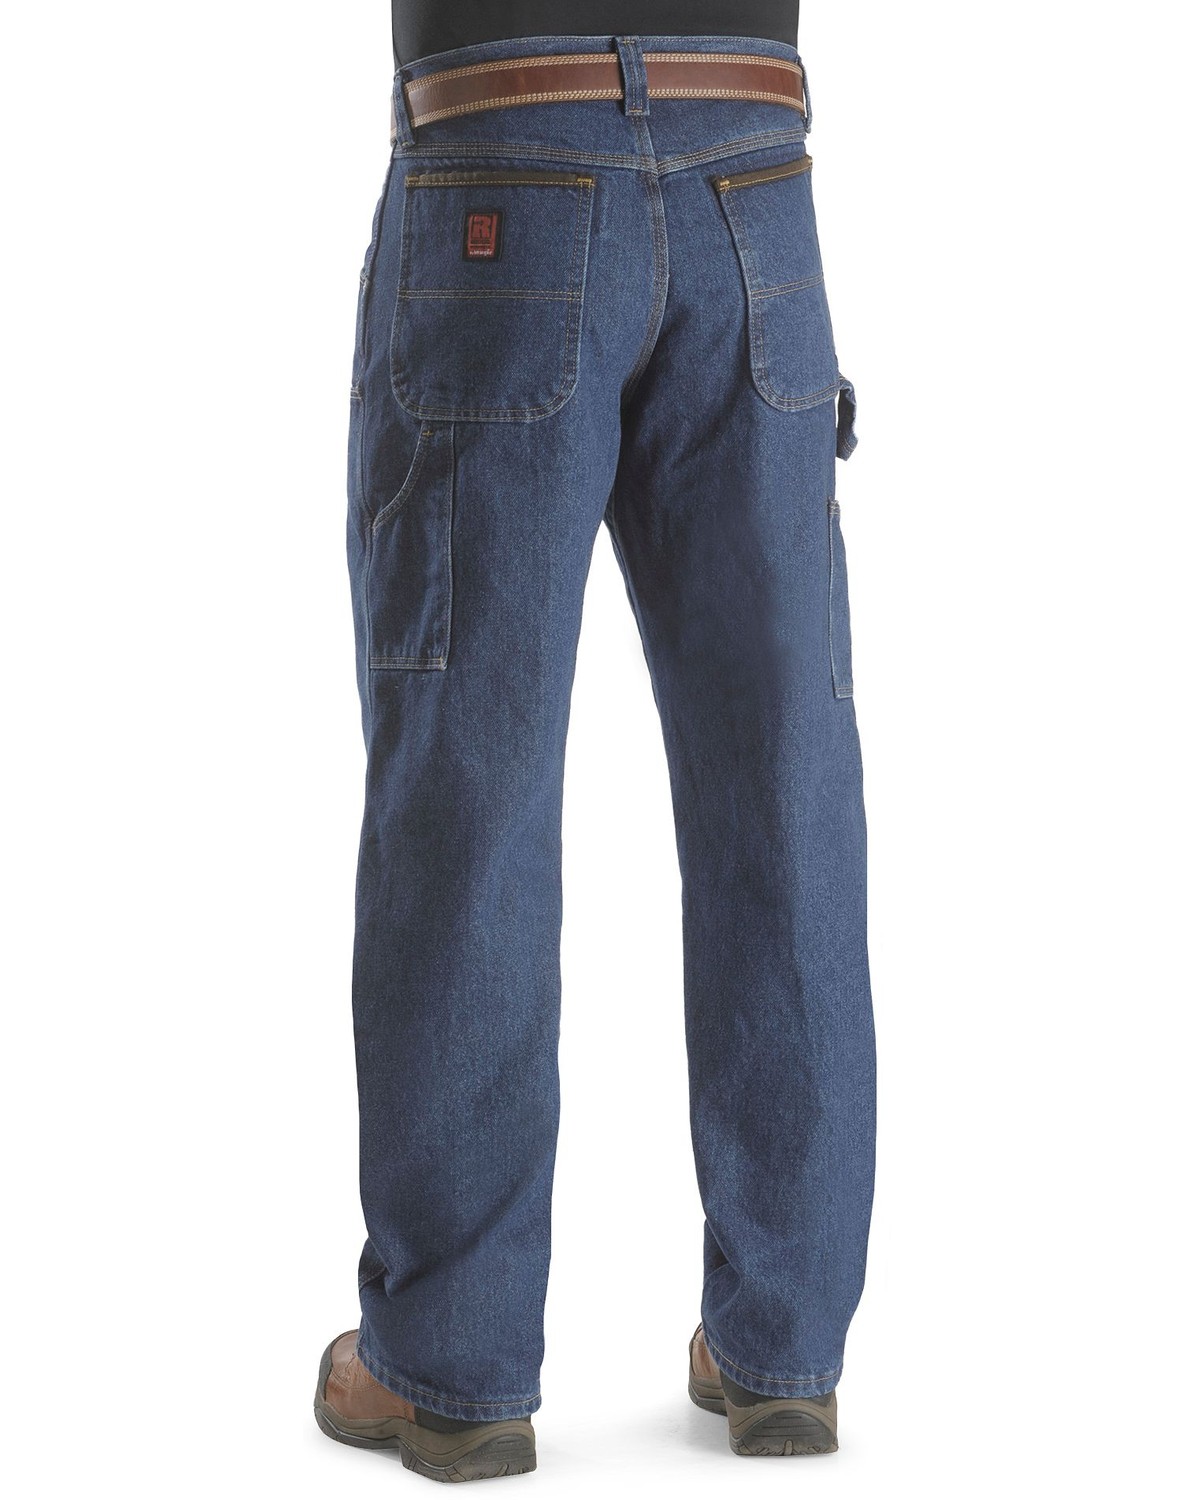 Wrangler Jeans - Riggs Relaxed Fit Utility Jeans | Sheplers